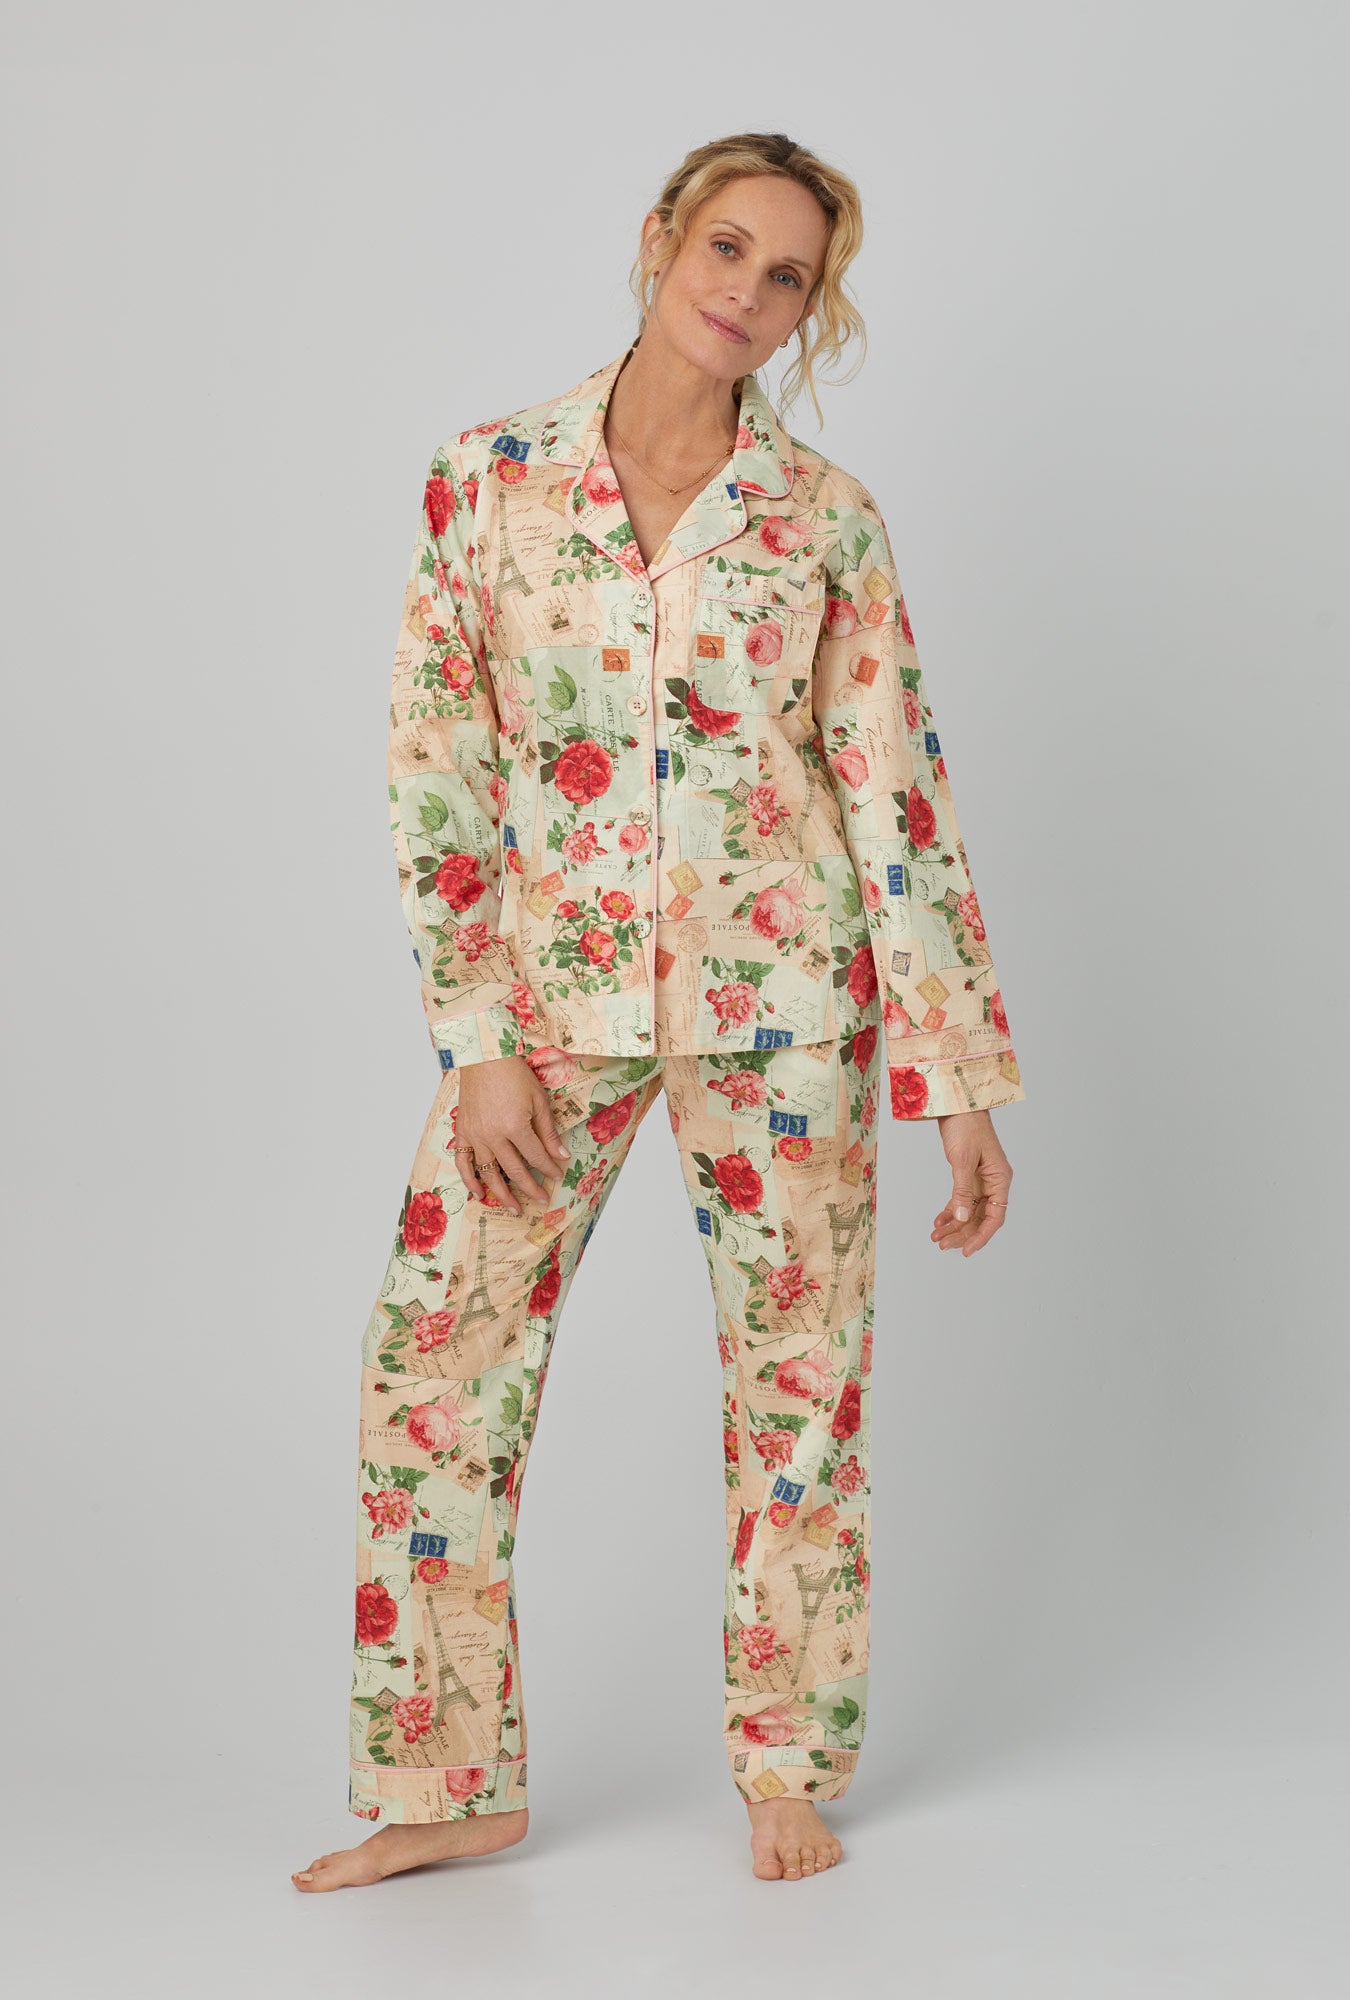 A lady wearing Long Sleeve Classic Woven Cotton Poplin PJ Set with Love Notes print